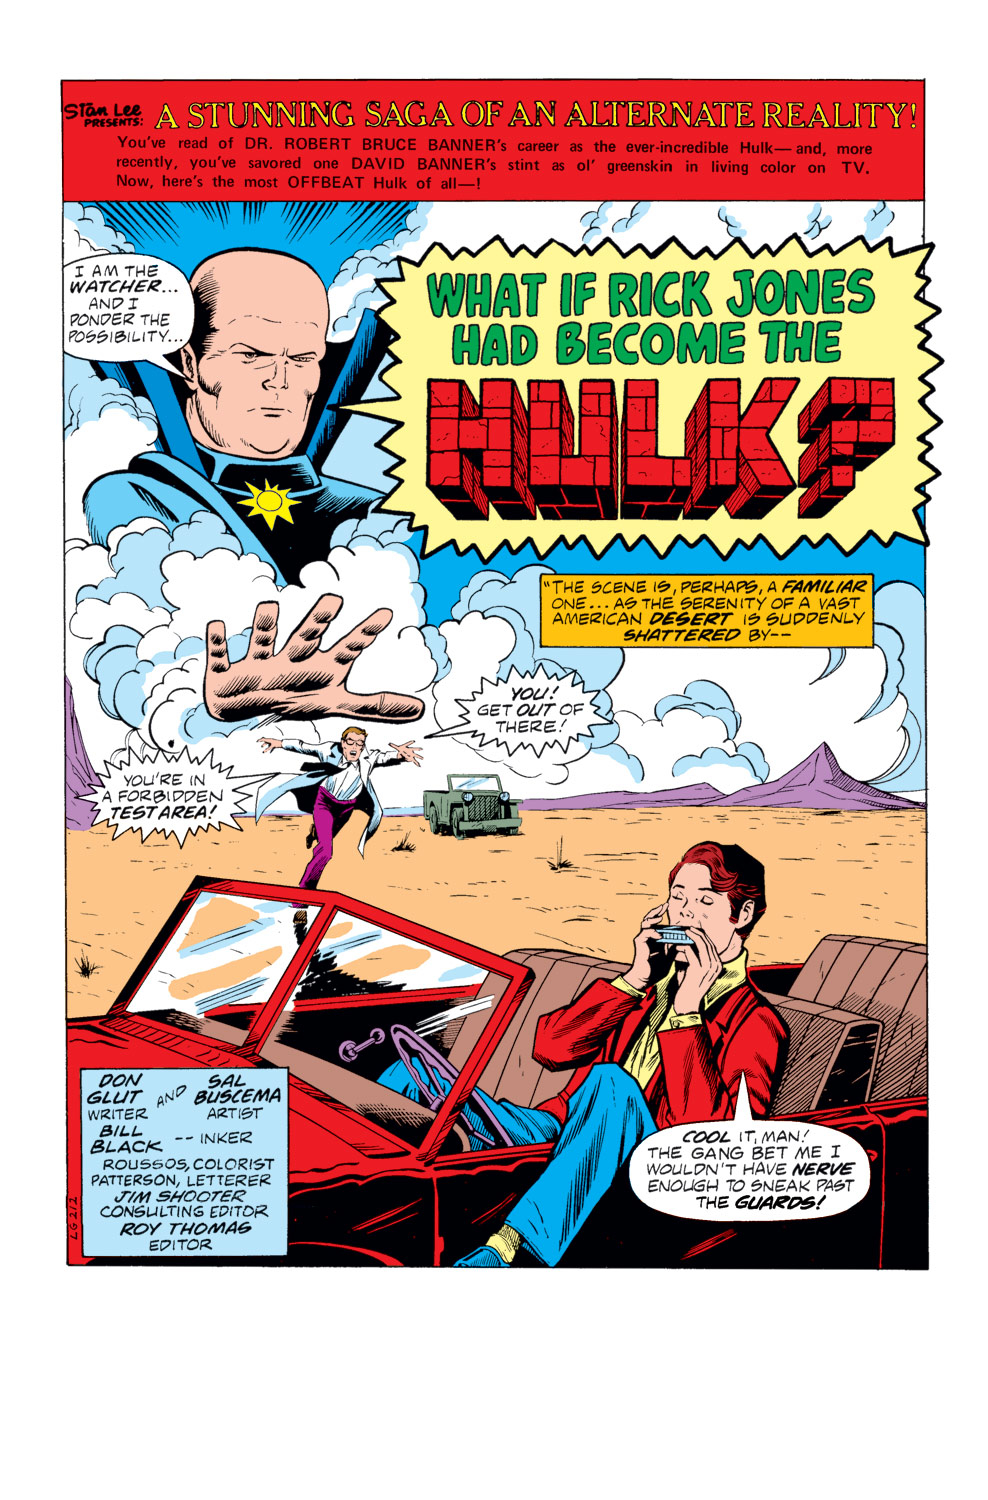 What If? (1977) issue 12 - Rick Jones had become the Hulk - Page 2